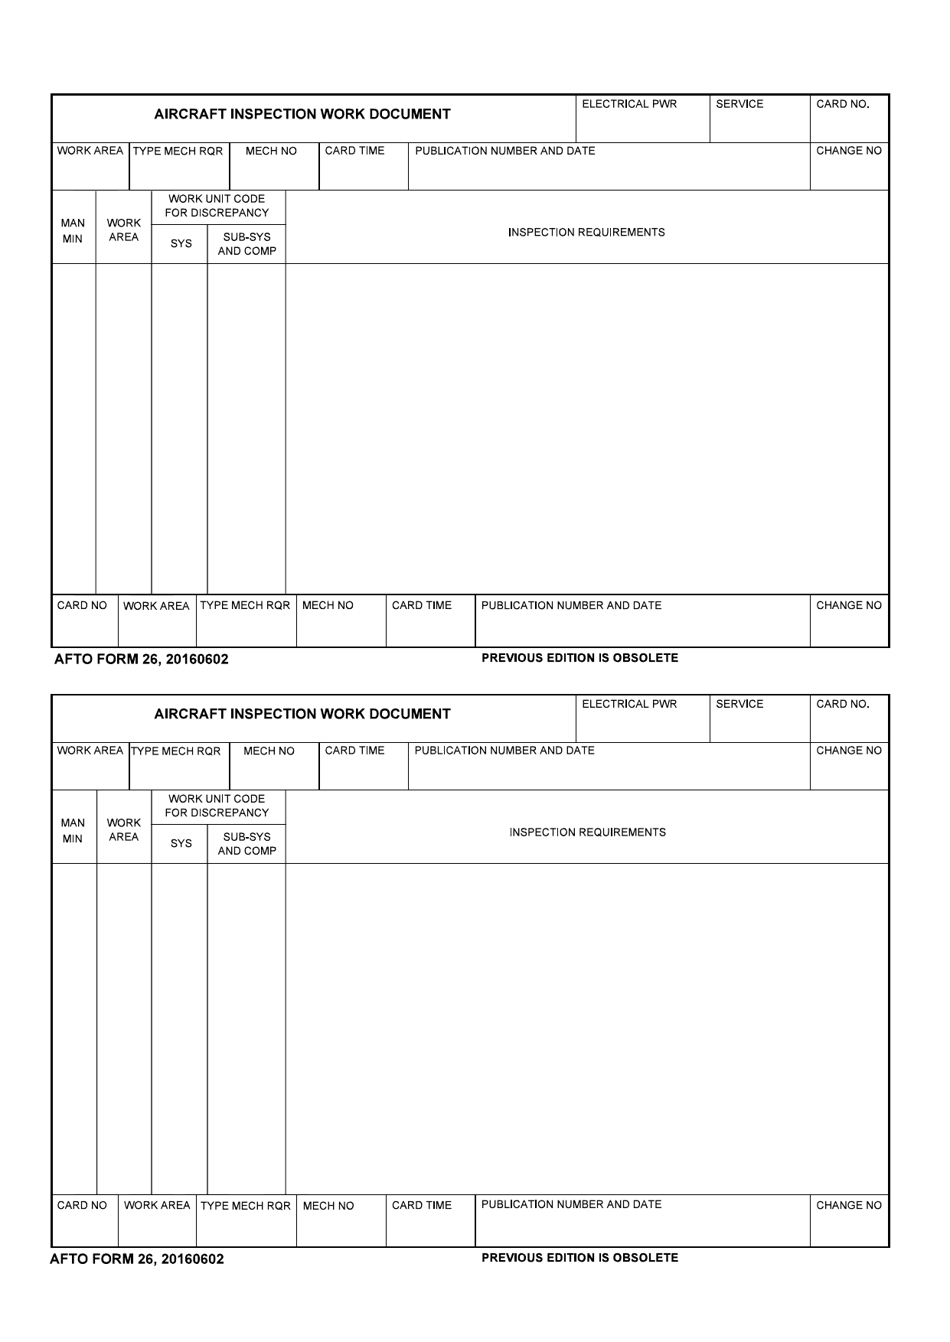 AFTO Form 26 Aircraft Inspection Work Document, Page 1